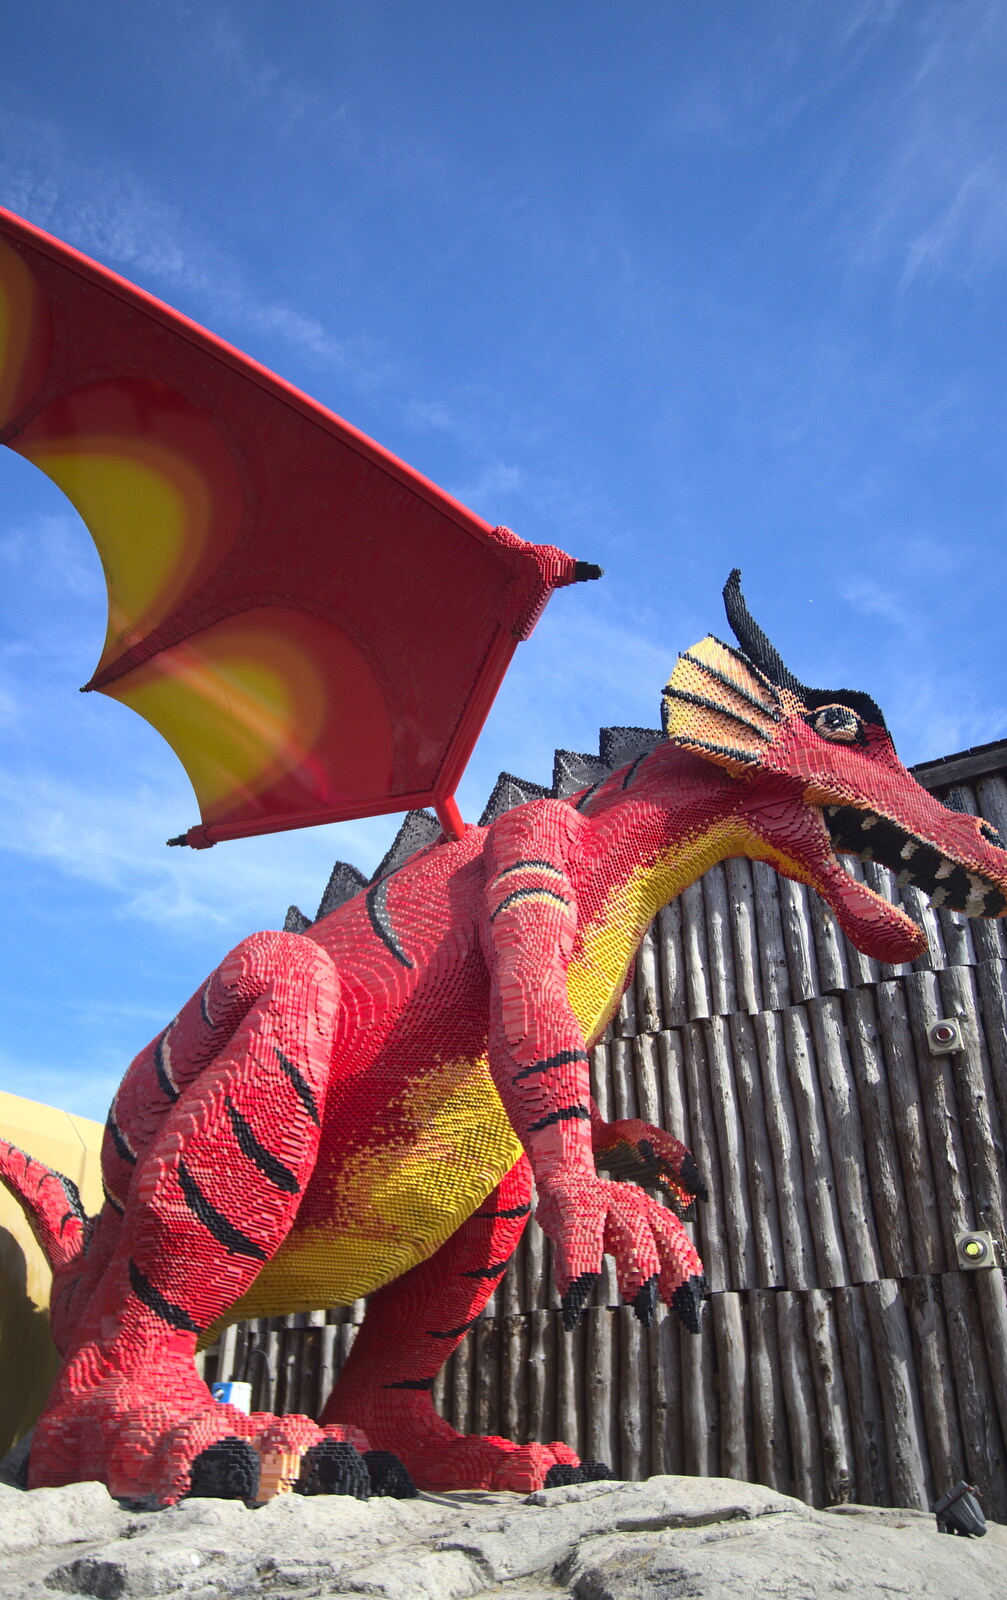 A Lego dragon from A Trip to Legoland, Windsor, Berkshire - 25th March 2017